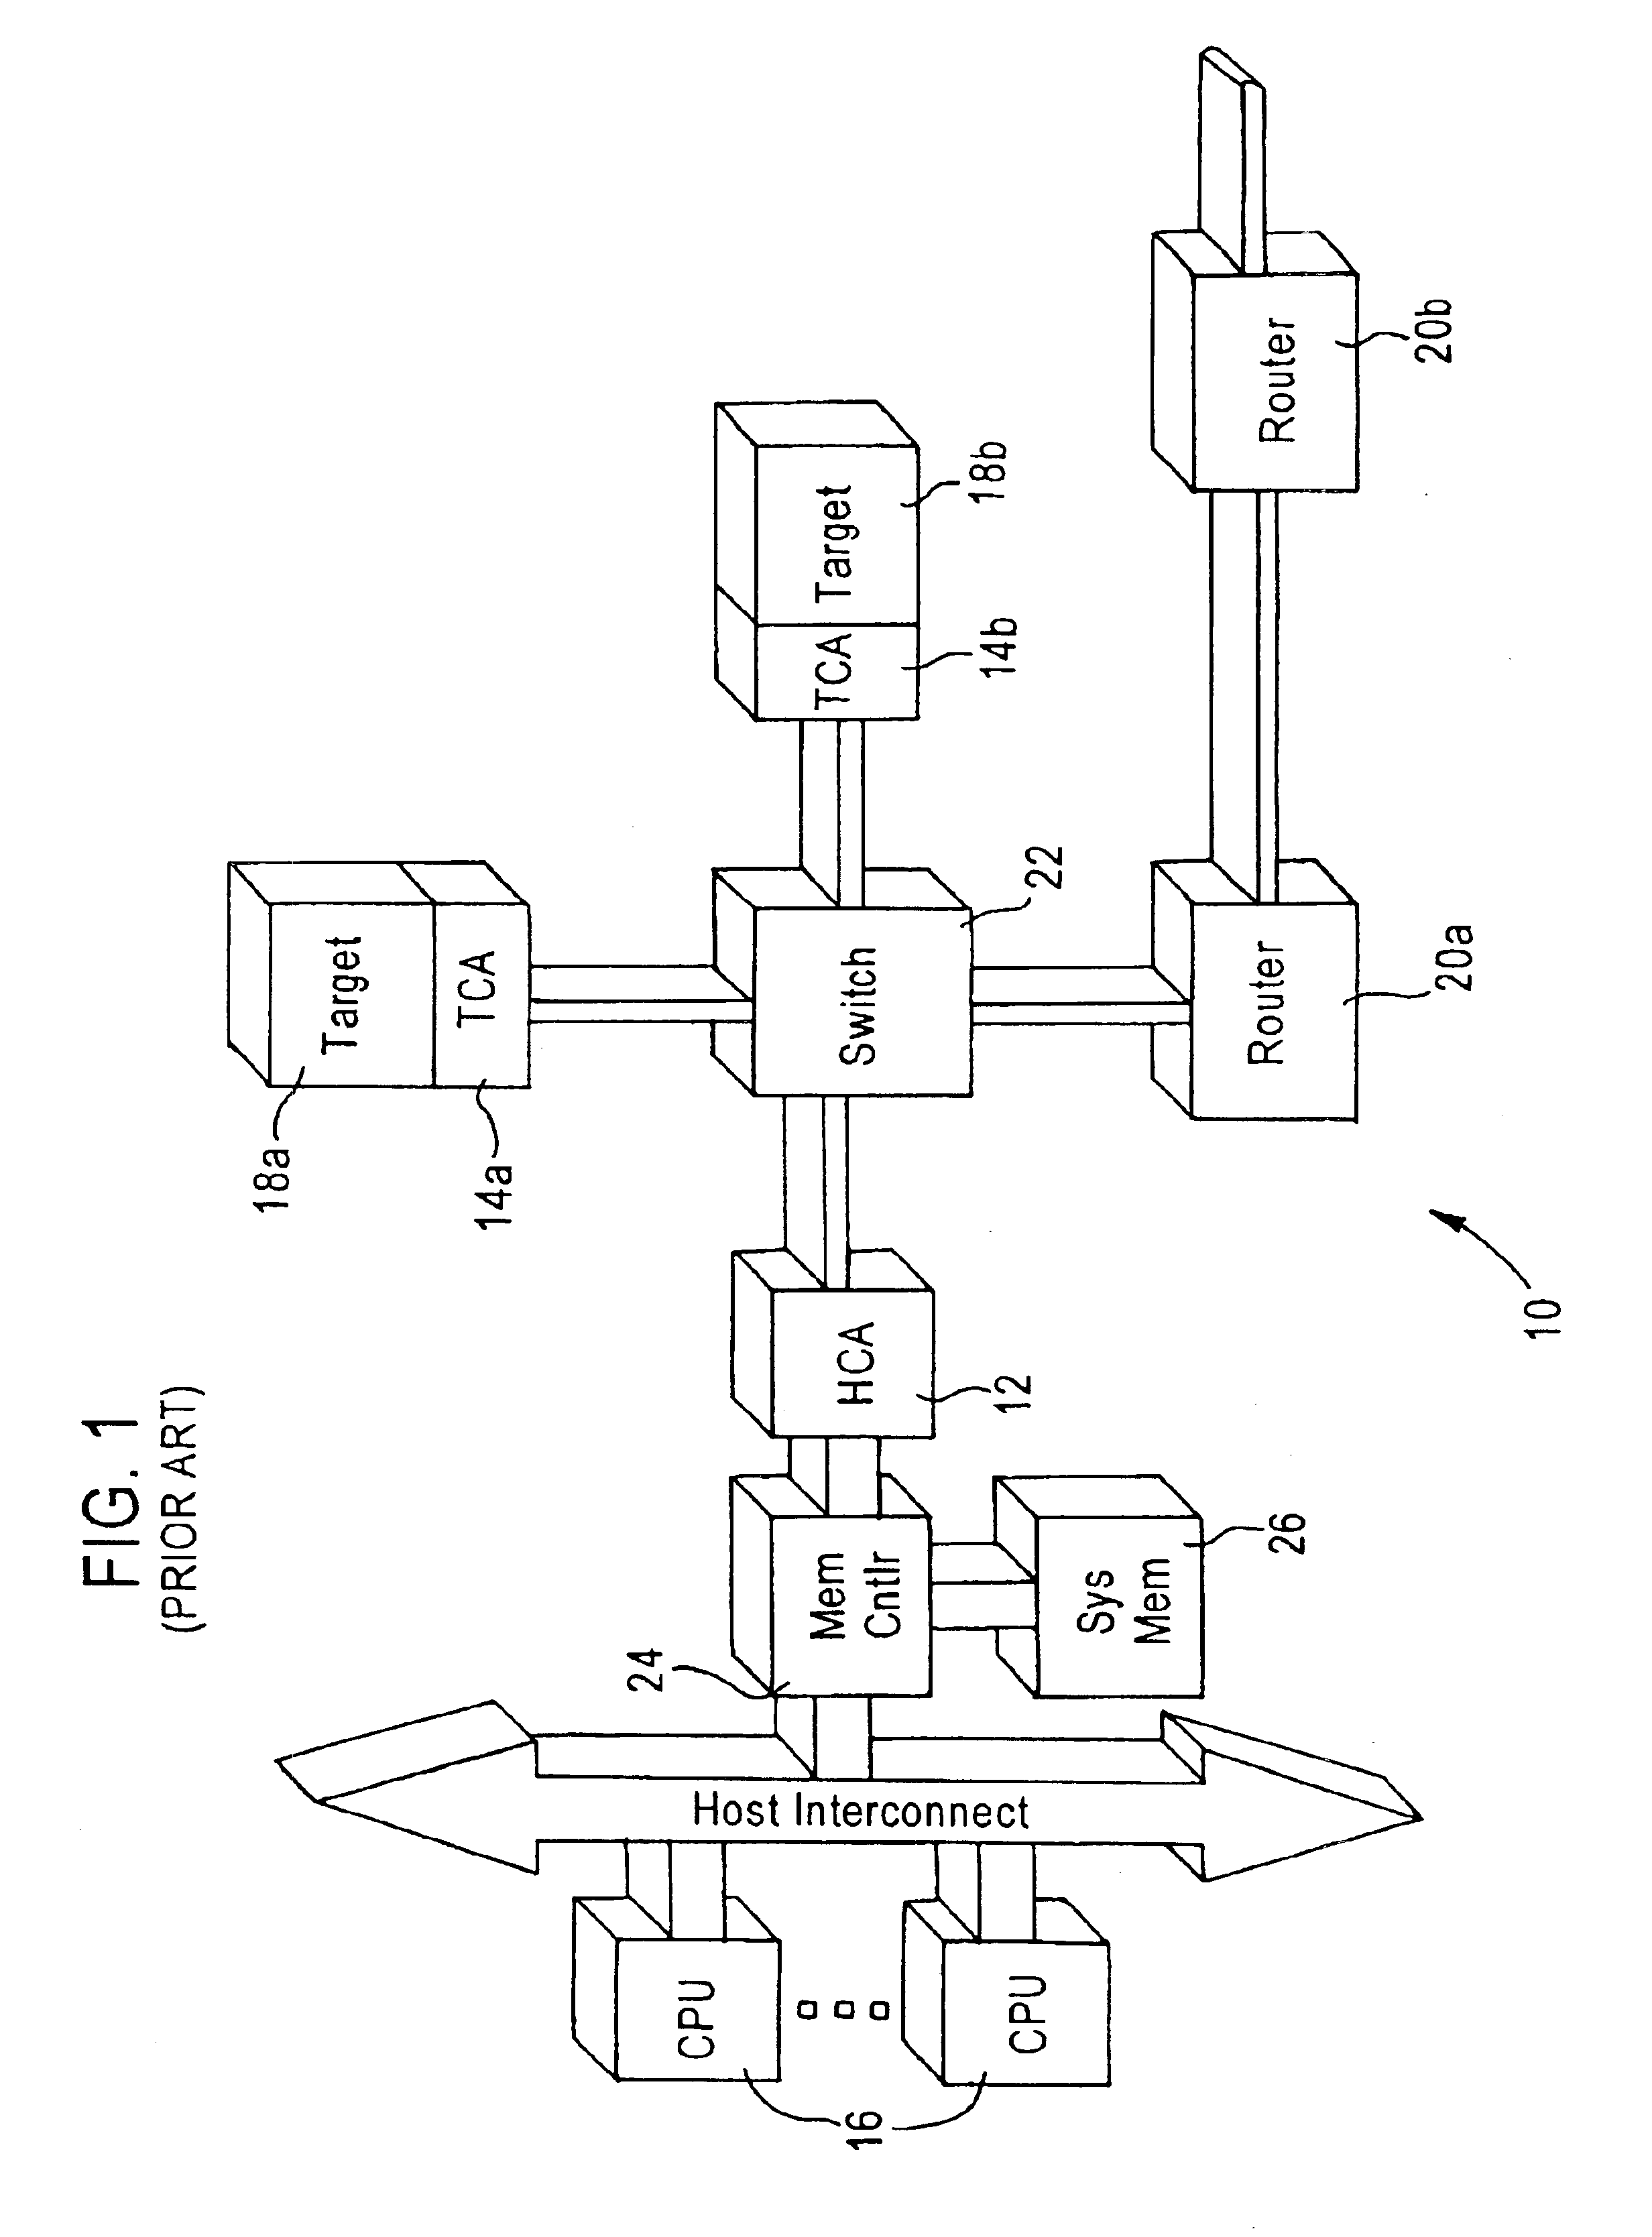 Host channel adapter having partitioned link layer services for an infiniband server system